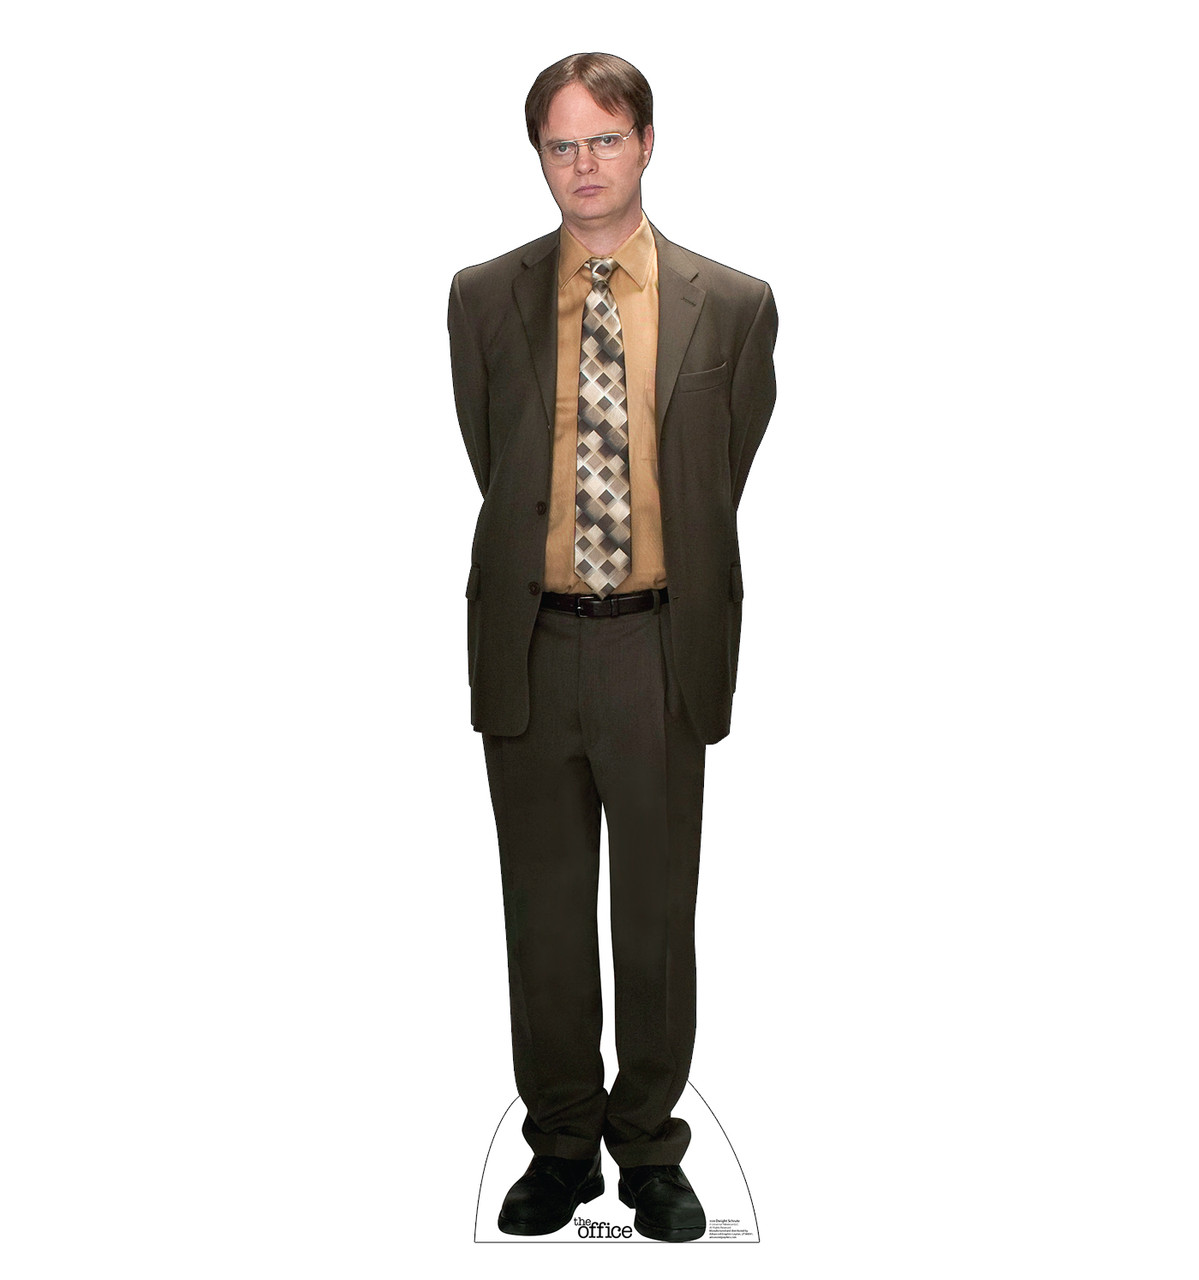 Life-size cardboard standee of Dwight Schrute from the Office TV show.